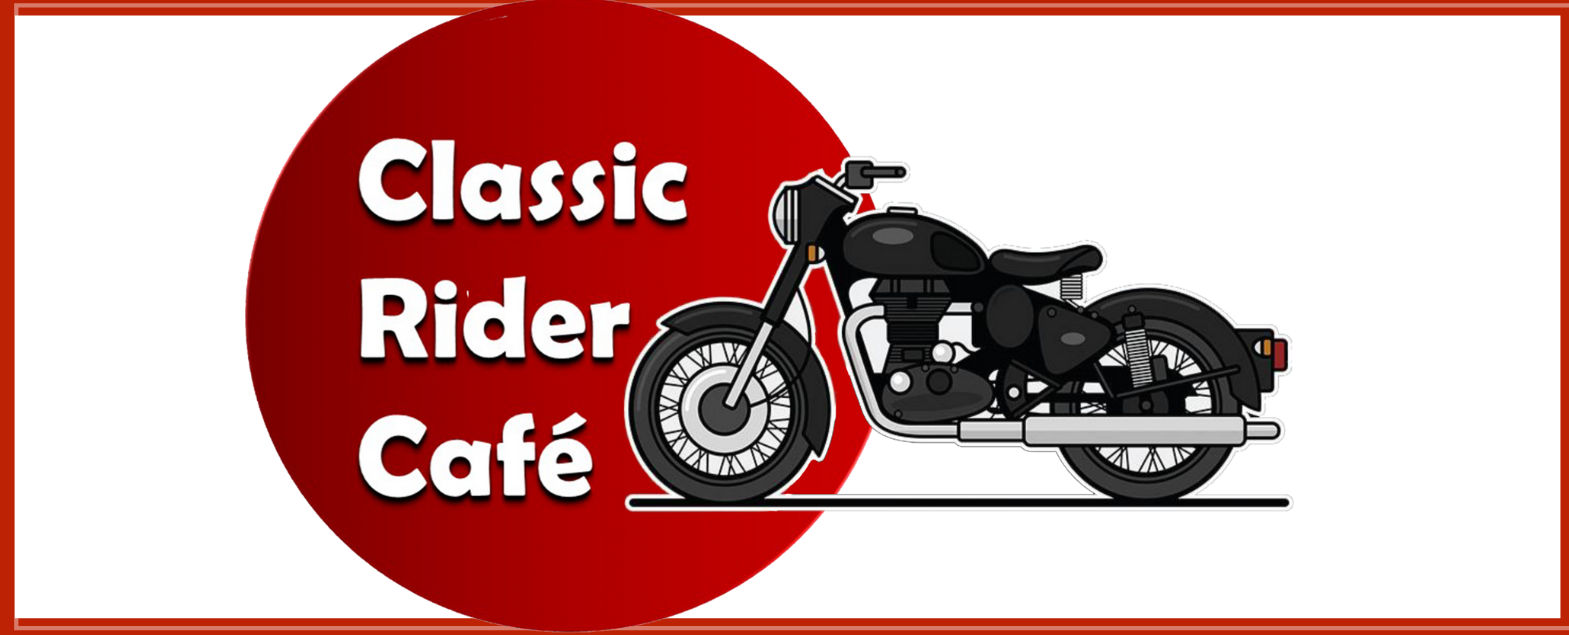 Classic Rider Cafe get eazy armoor